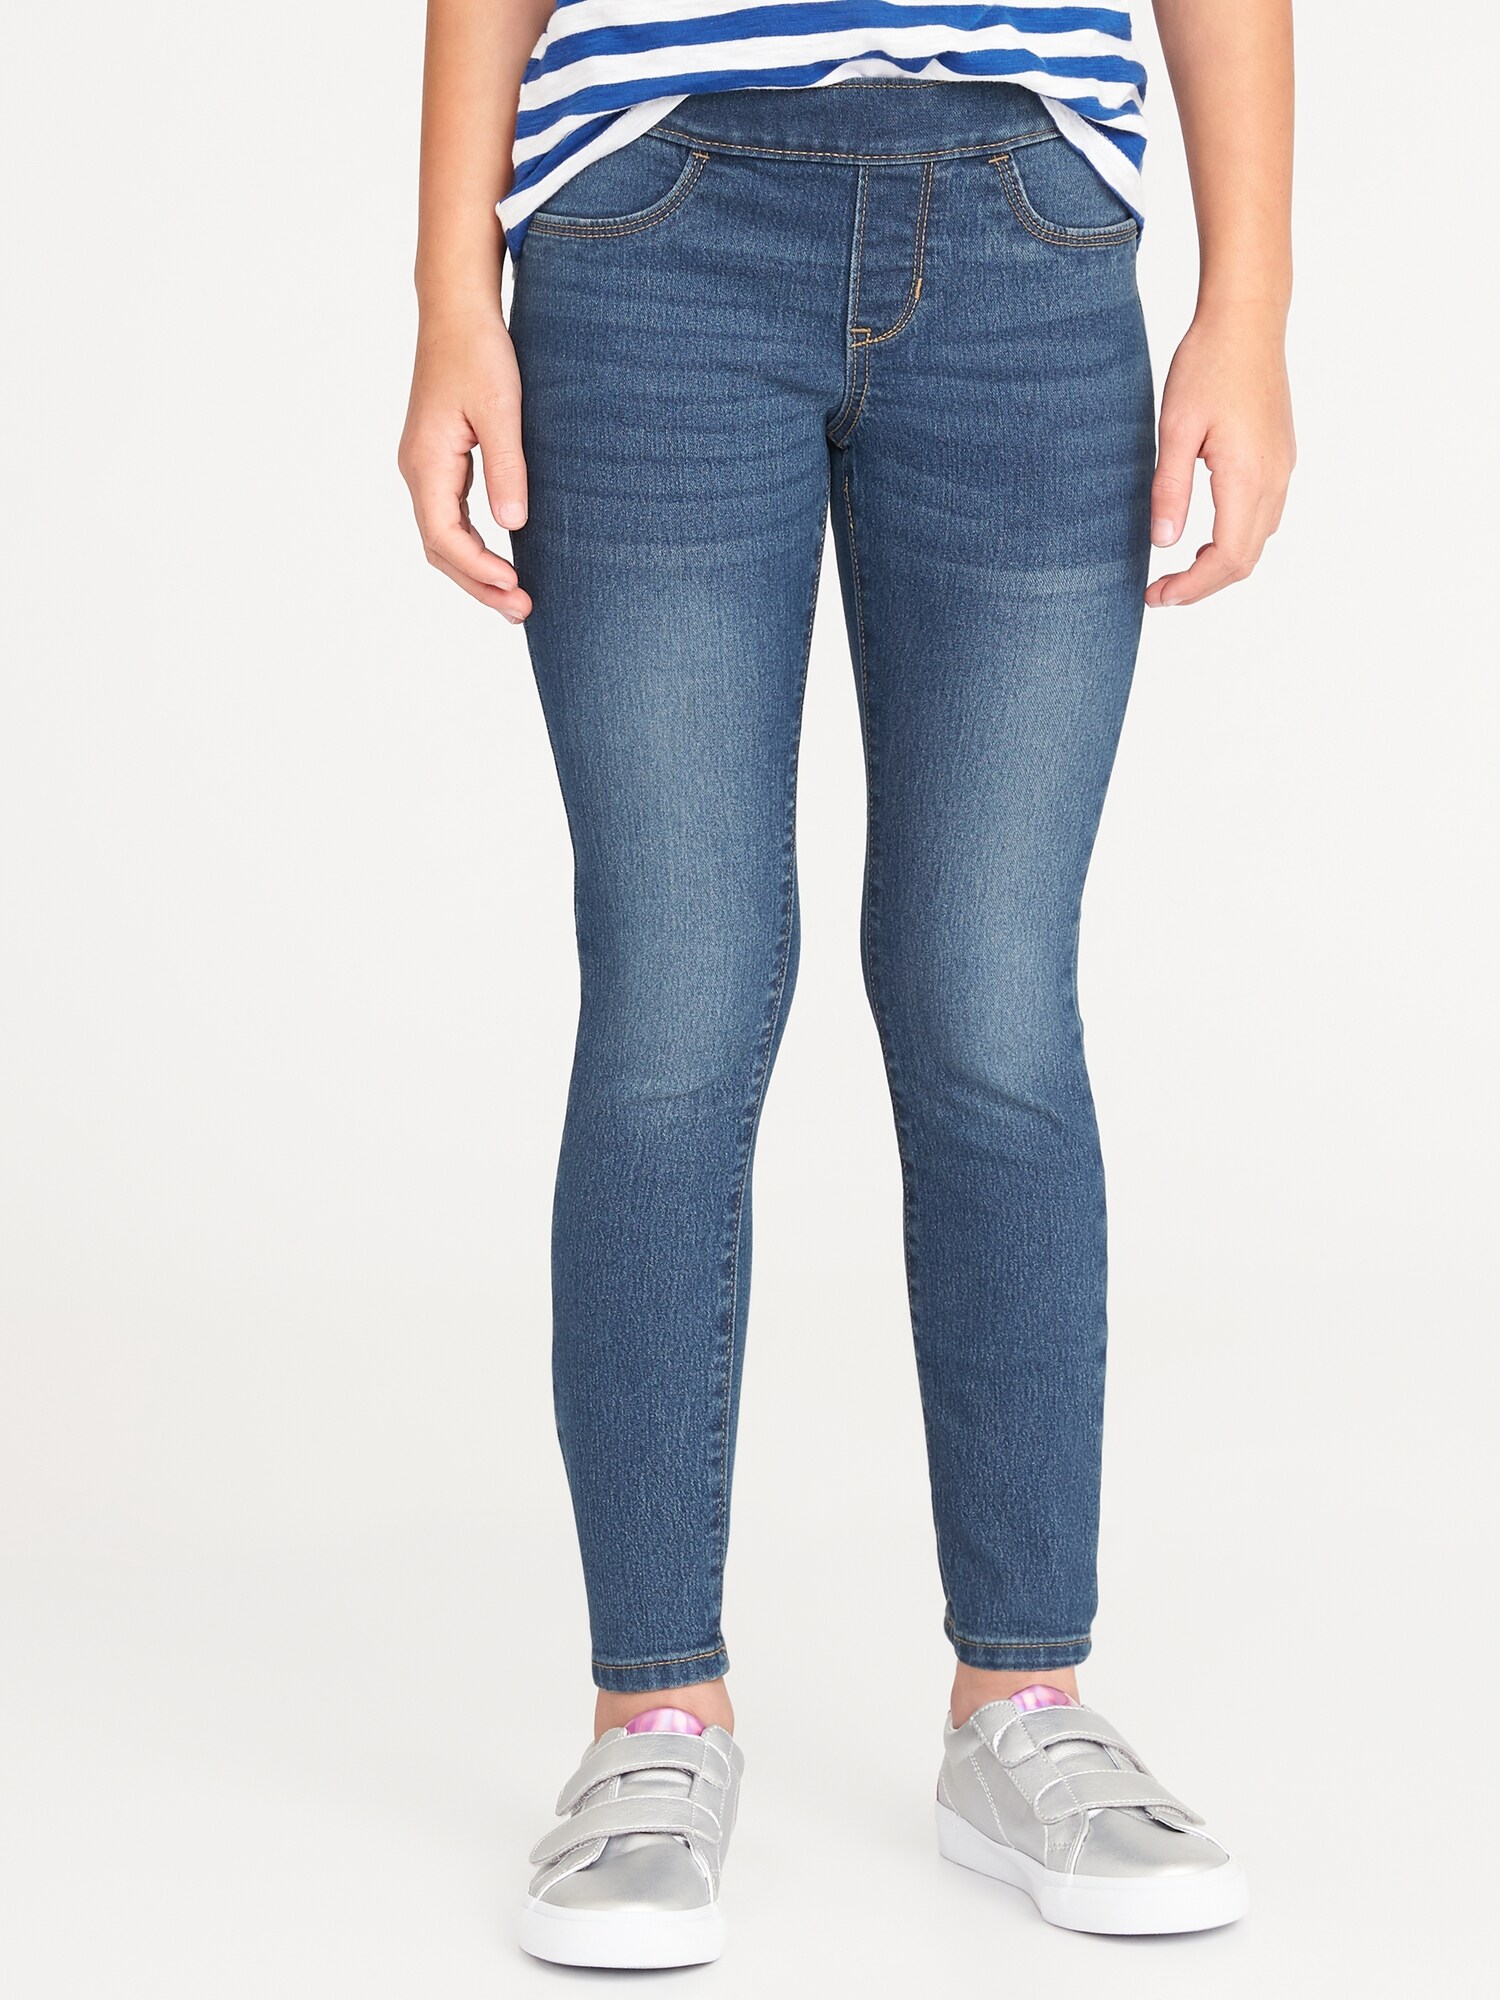 *Hot Deal* Skinny Built-In Tough Pull-On Jeans for Girls